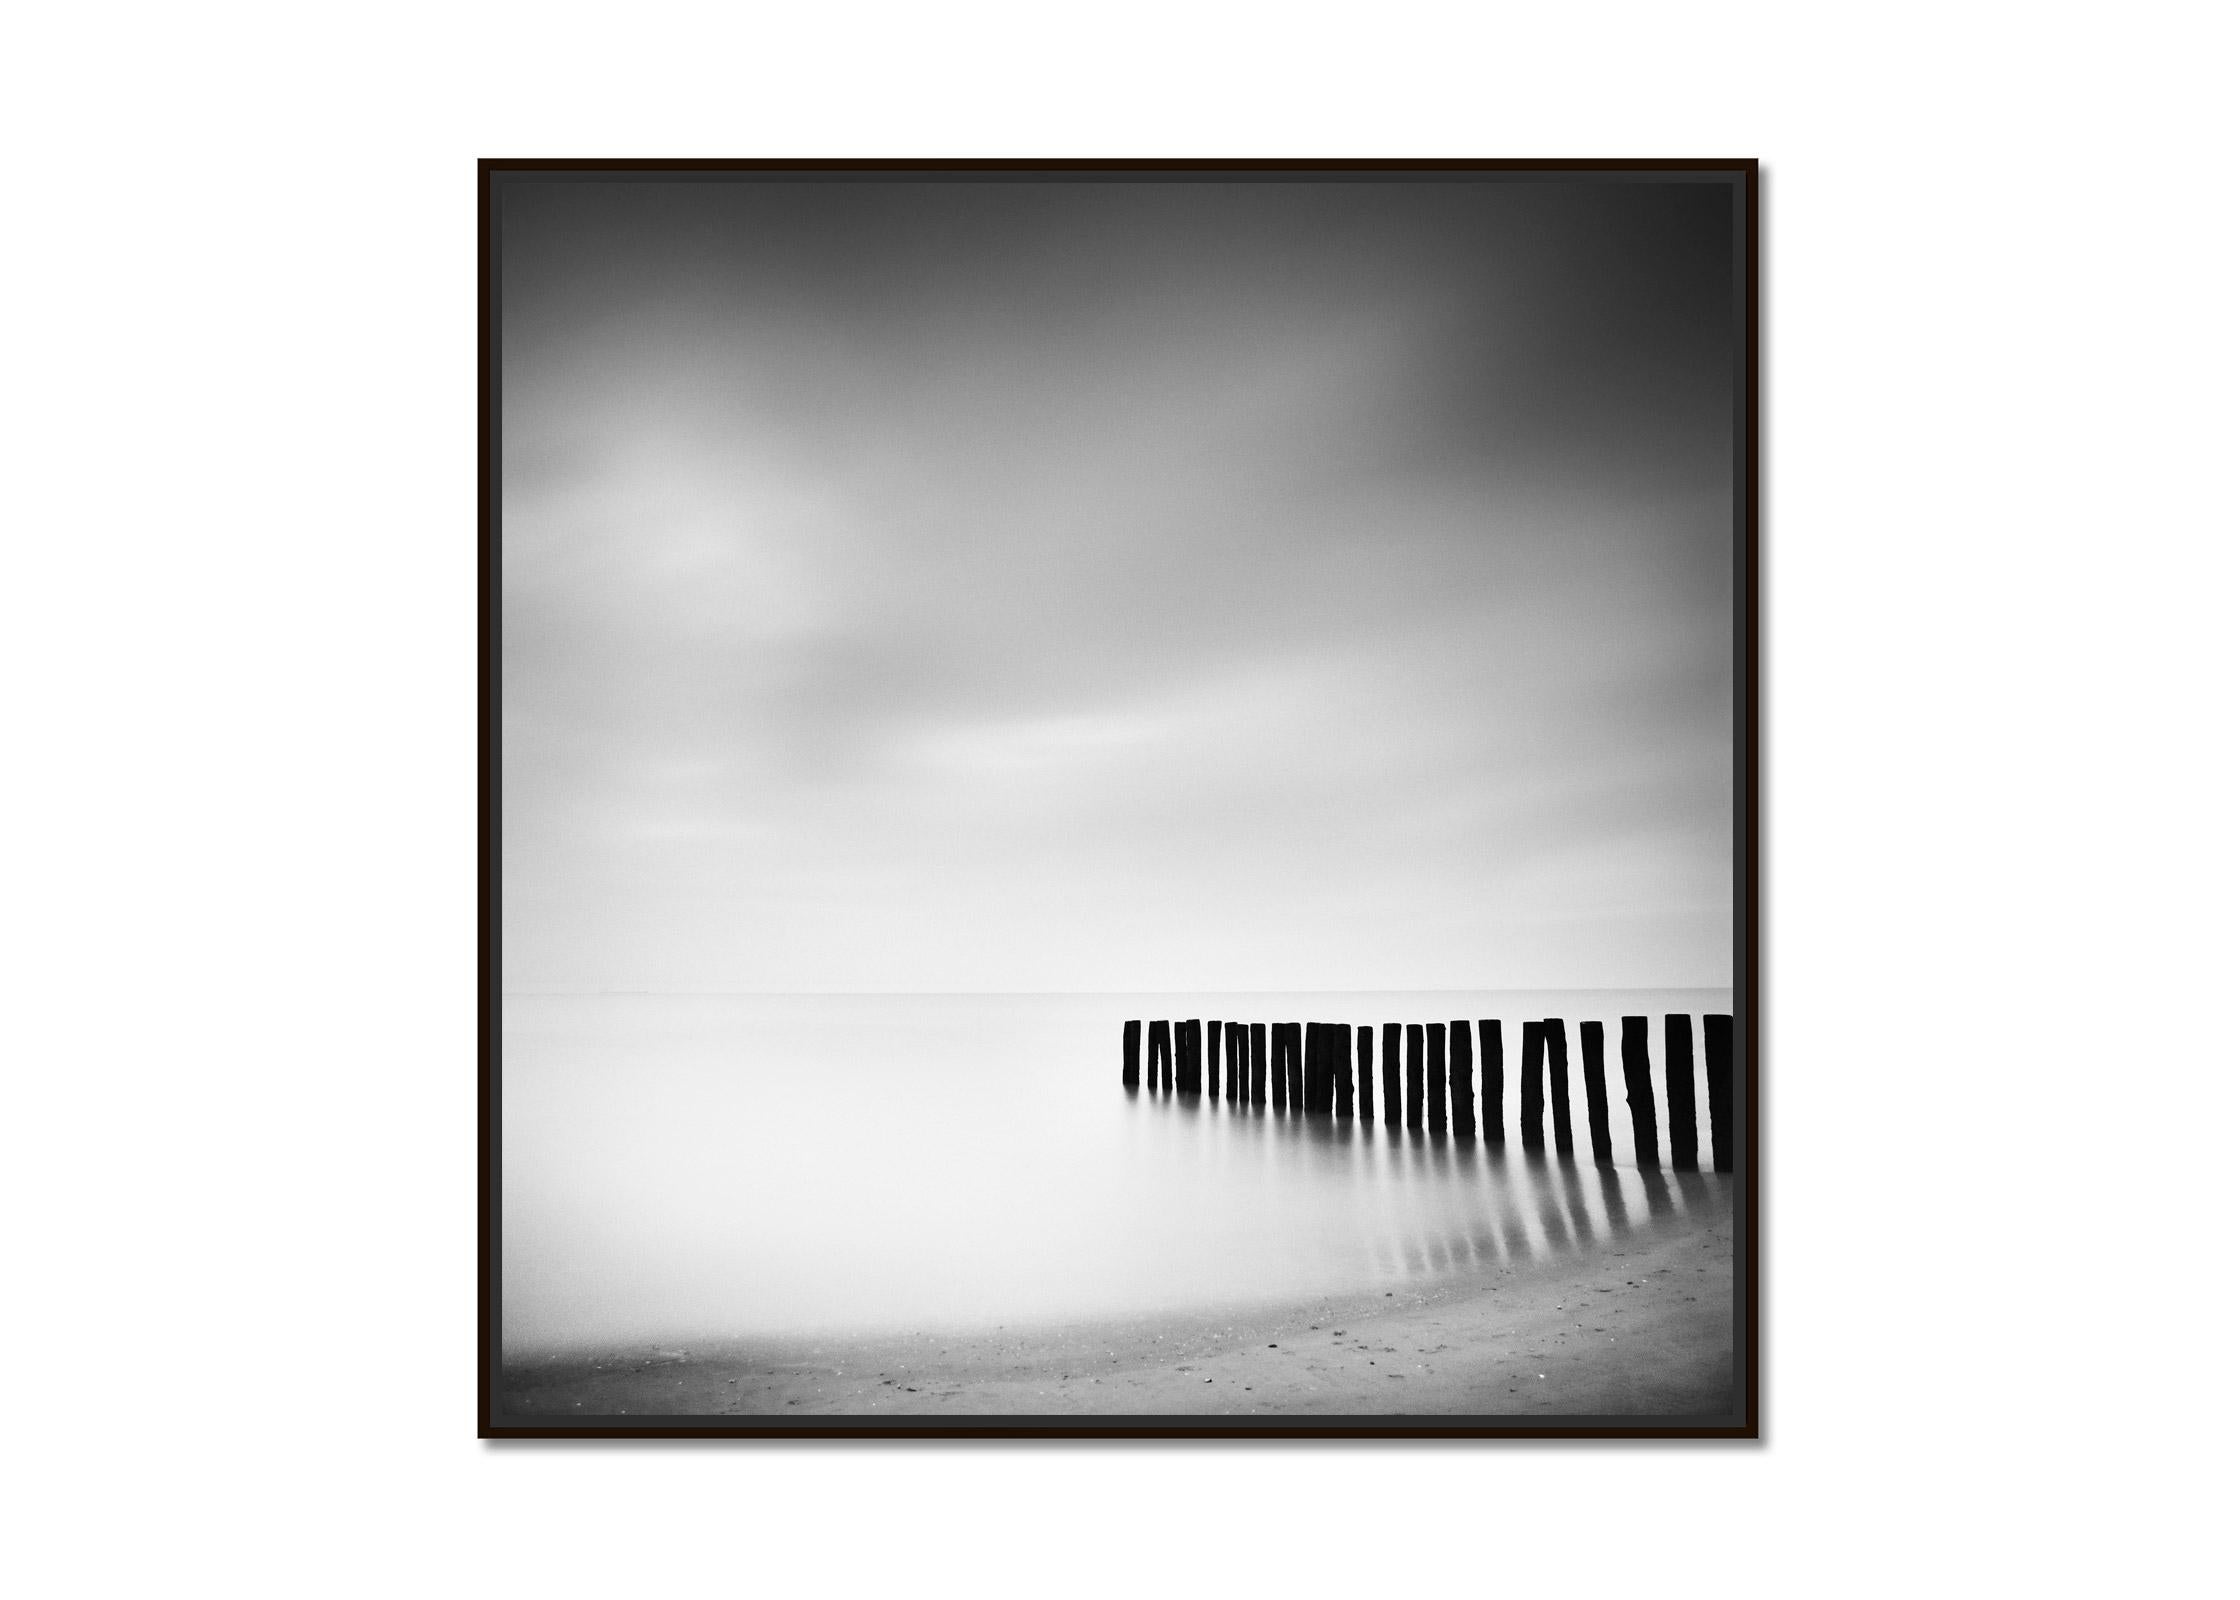 Wood Stakes, Netherlands, Black and White waterscape long exposure photography - Photograph by Gerald Berghammer